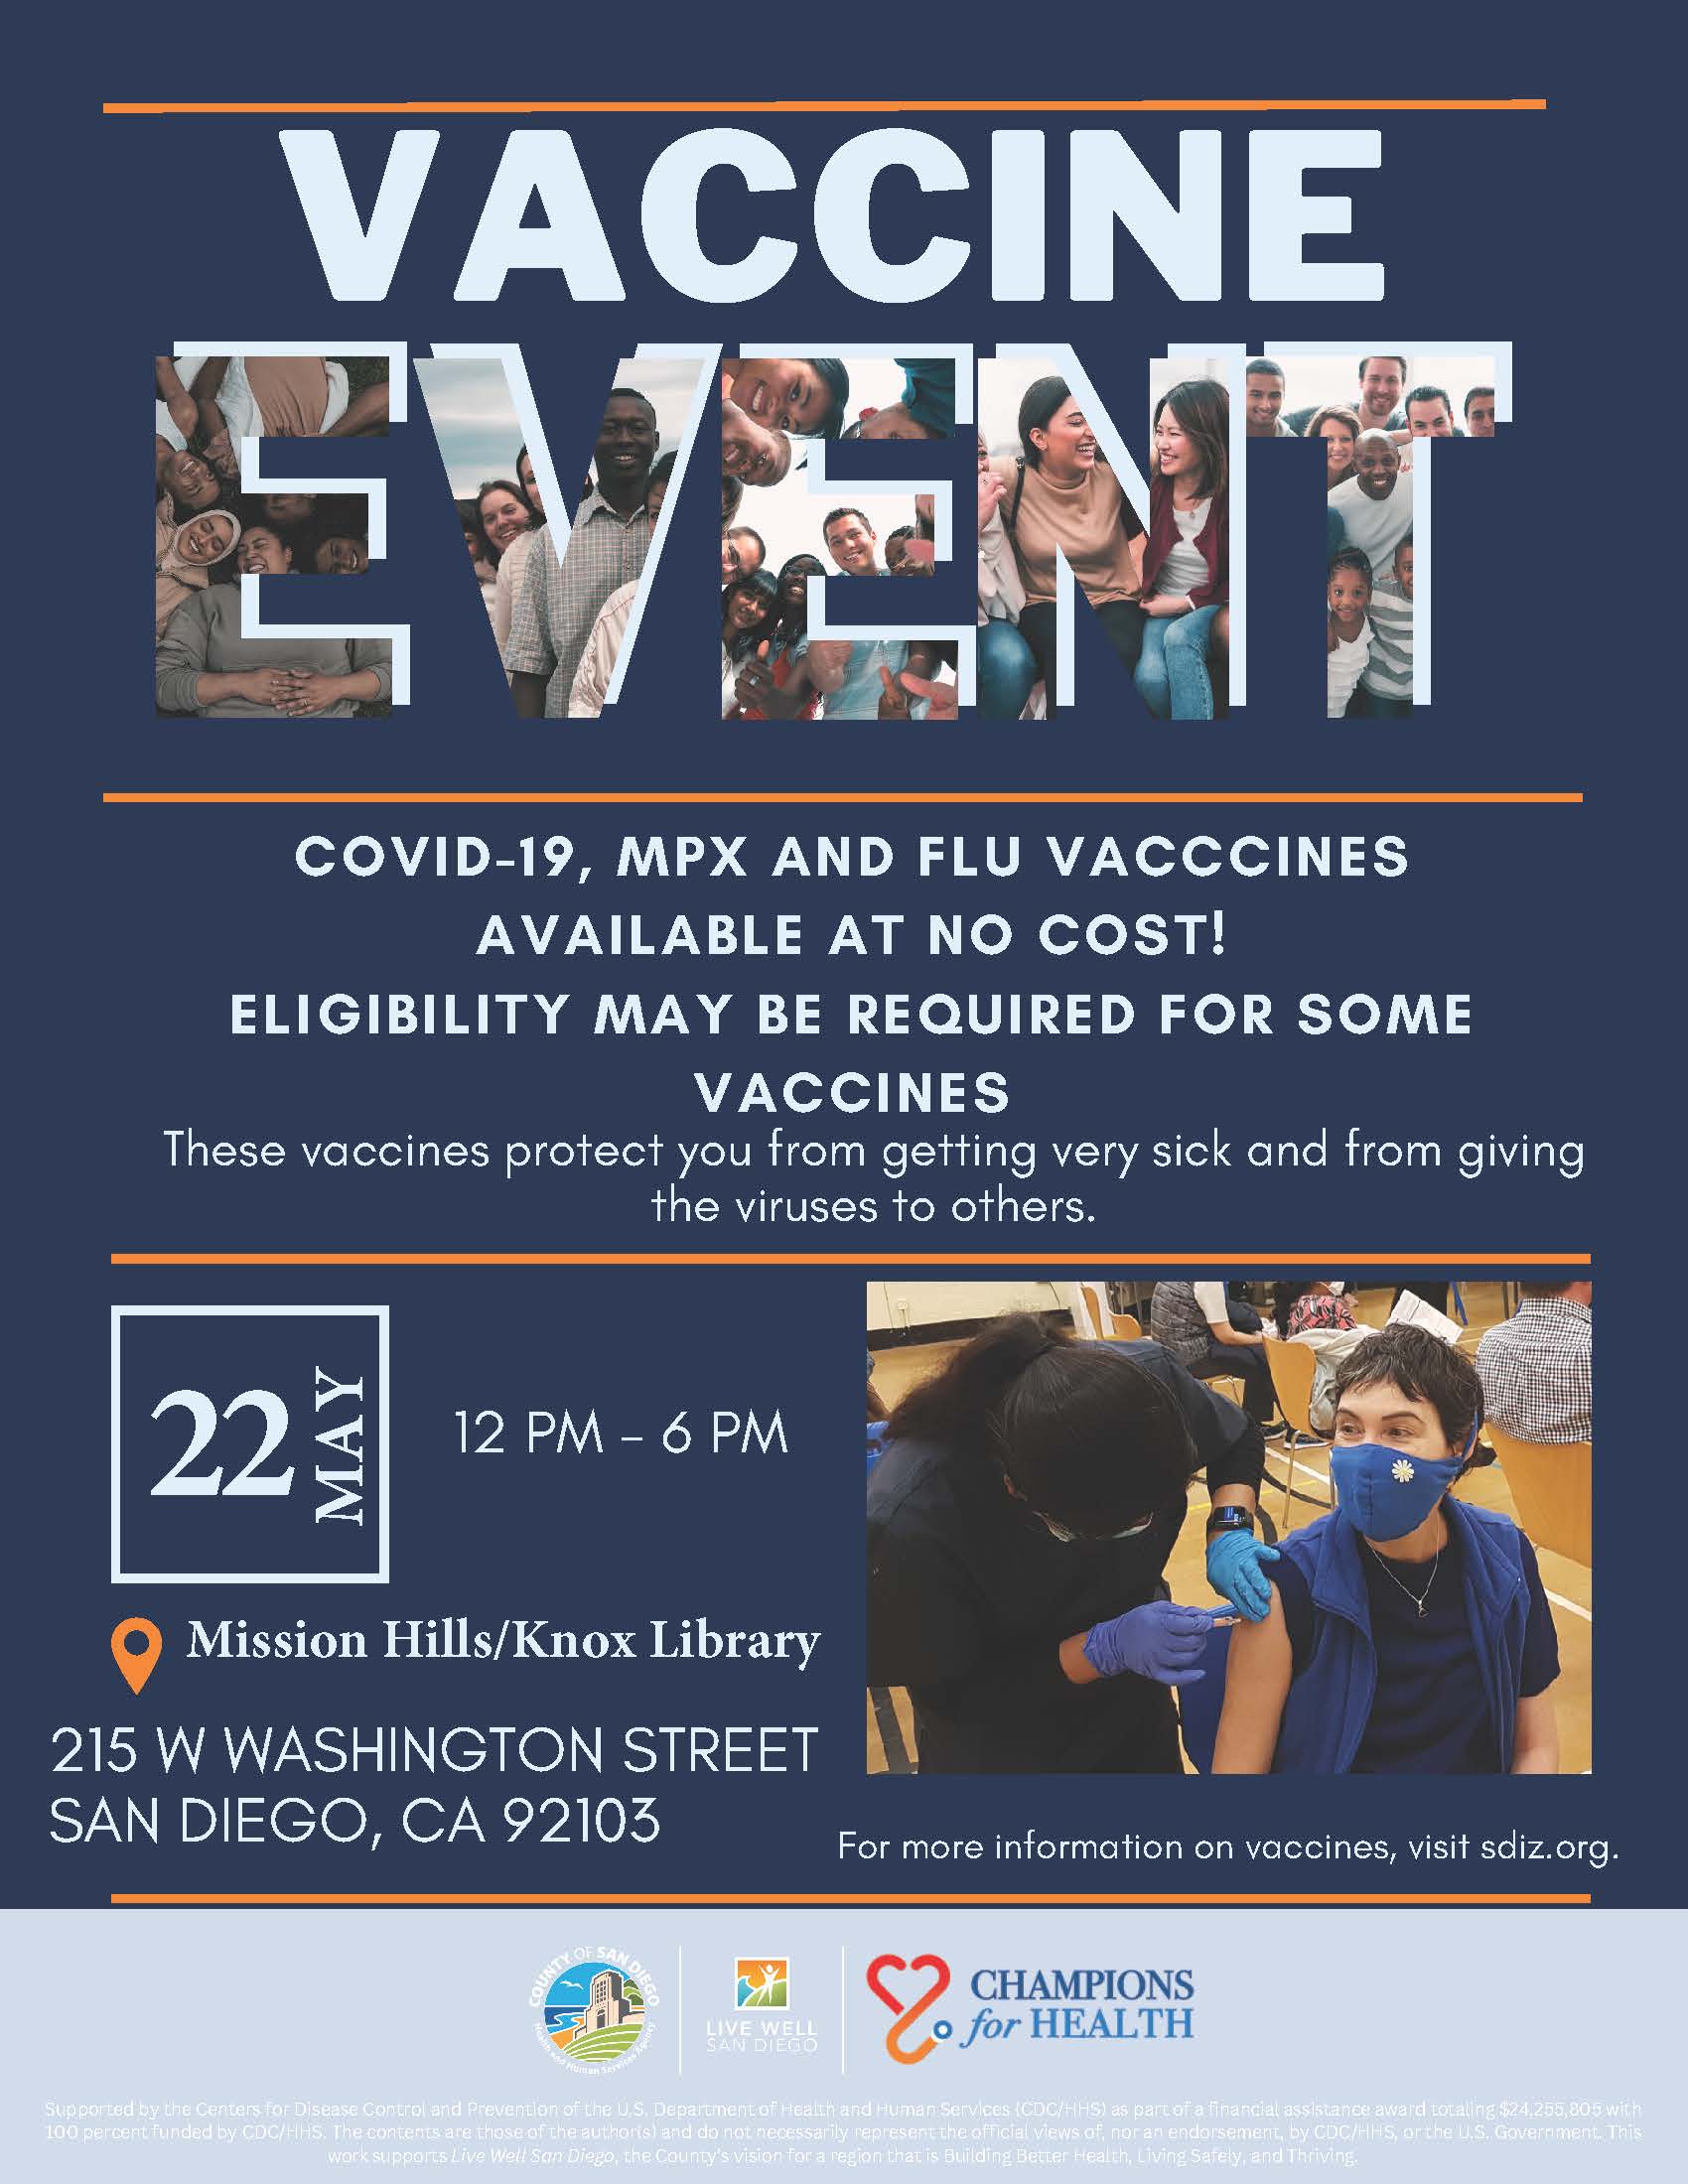 Flyer with details of event and photo of person receiving vaccine